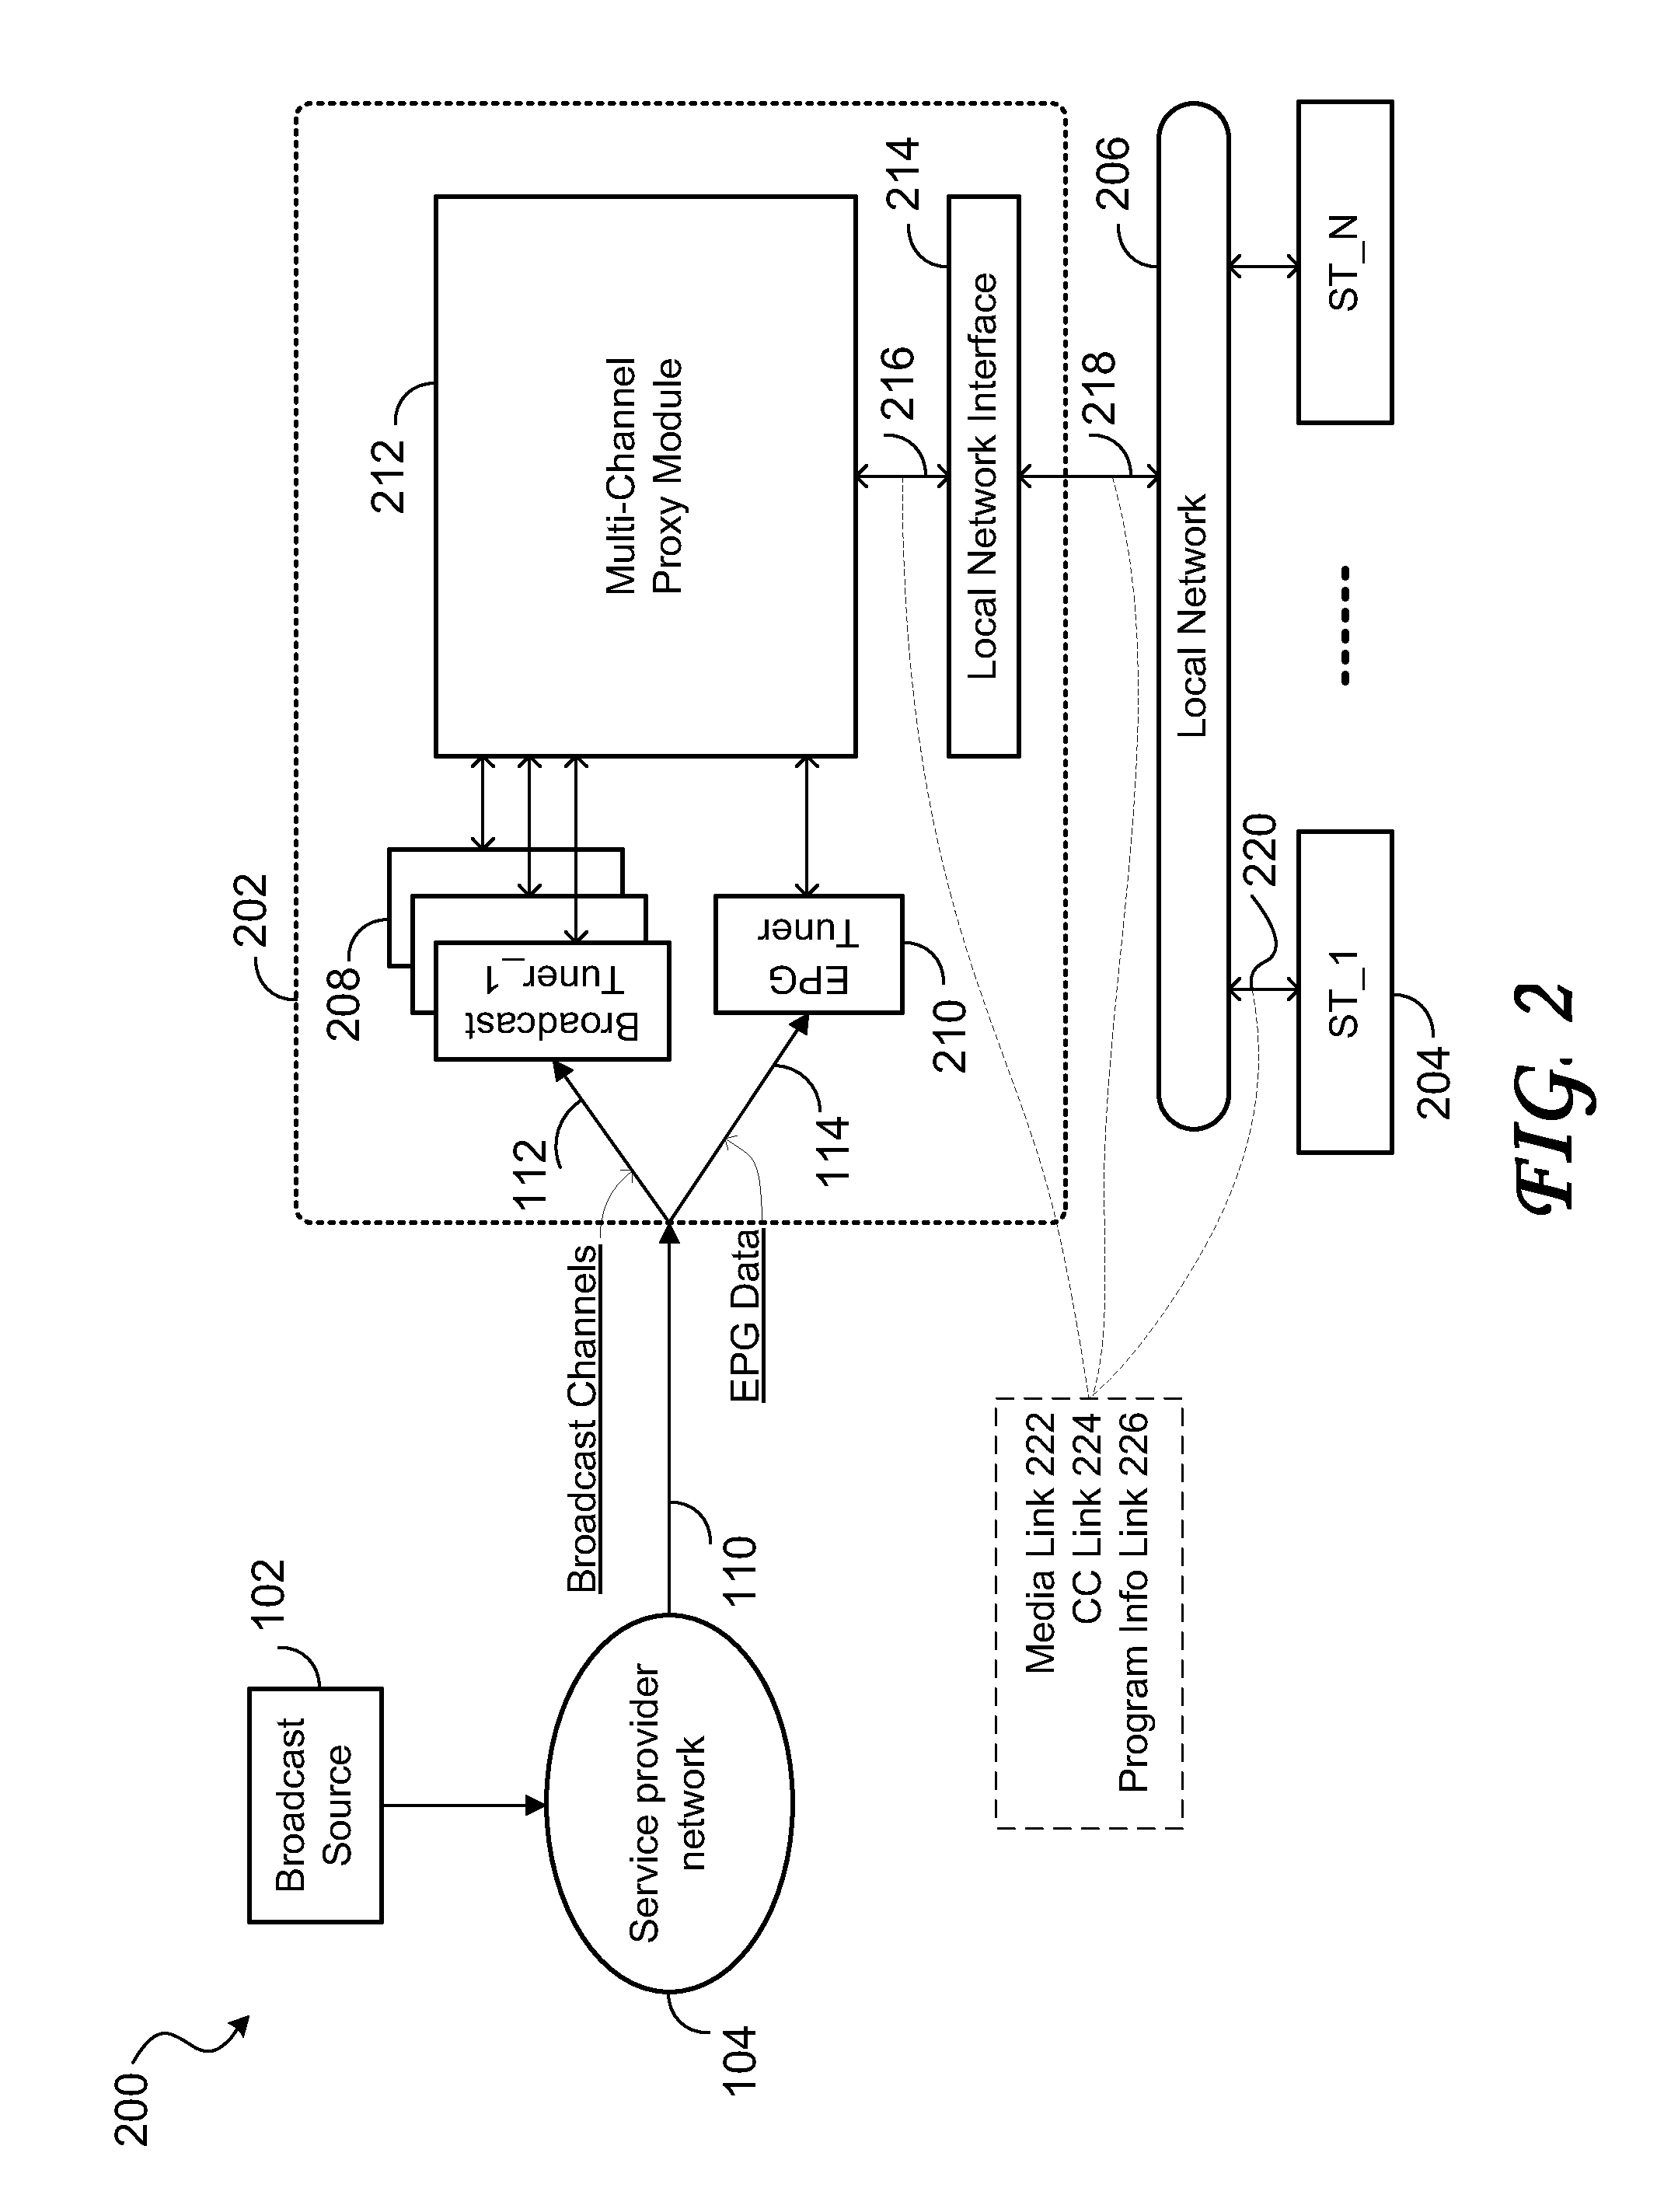 Realtime broadcast stream and control data conversion system and method